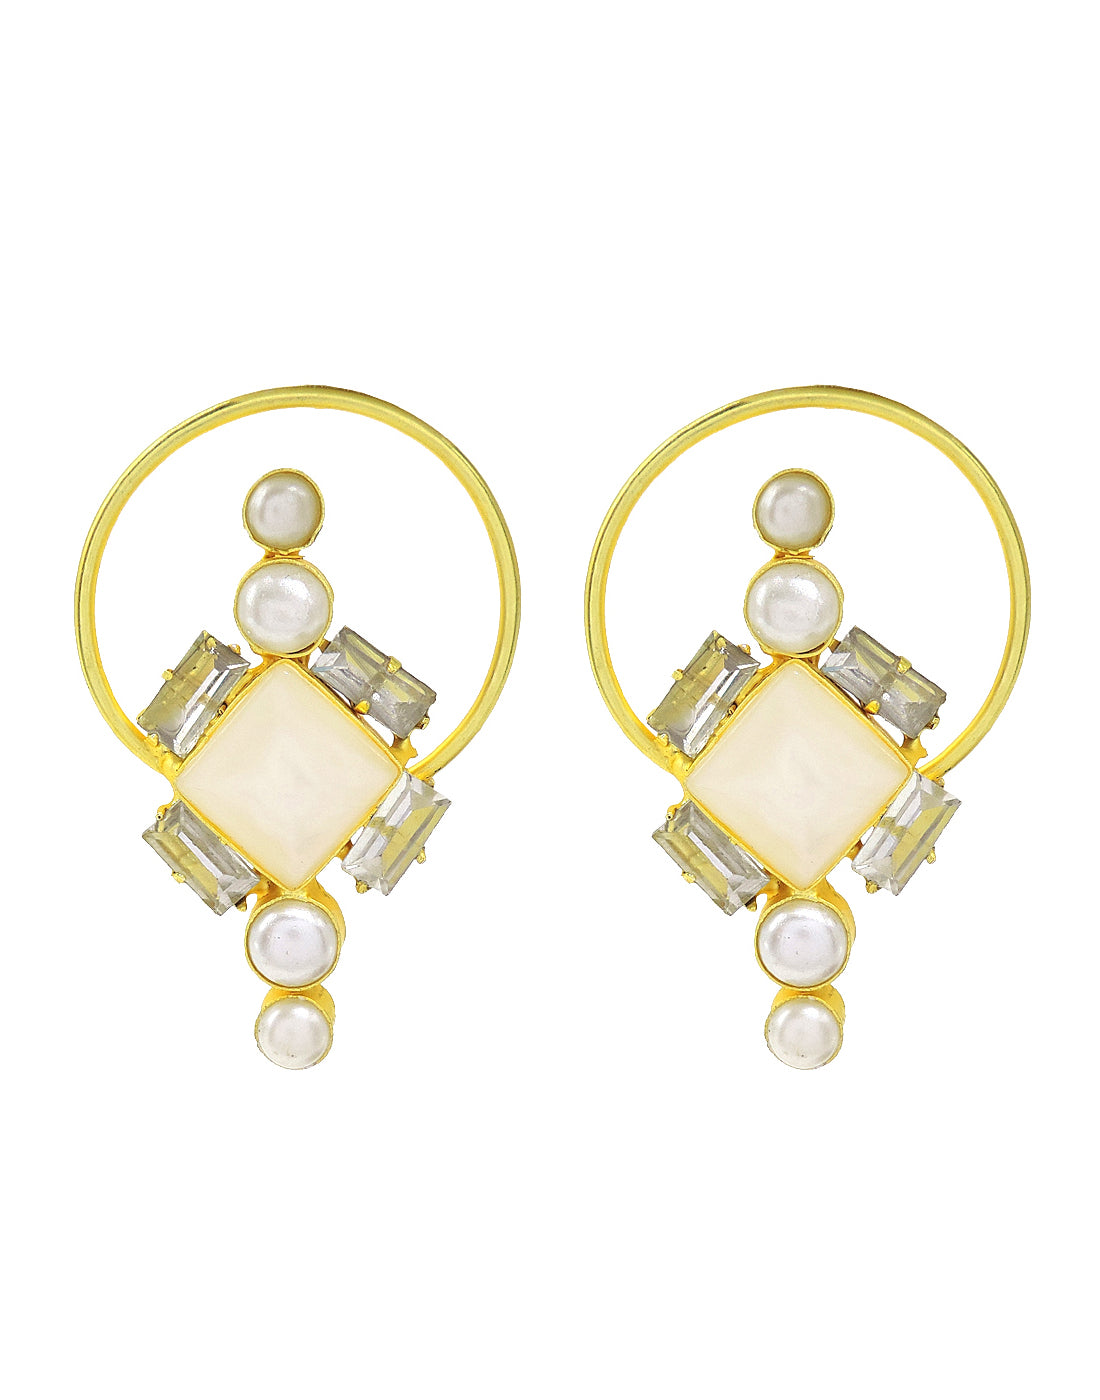 Crystal & Pearl Hoops- Handcrafted Jewellery from Dori